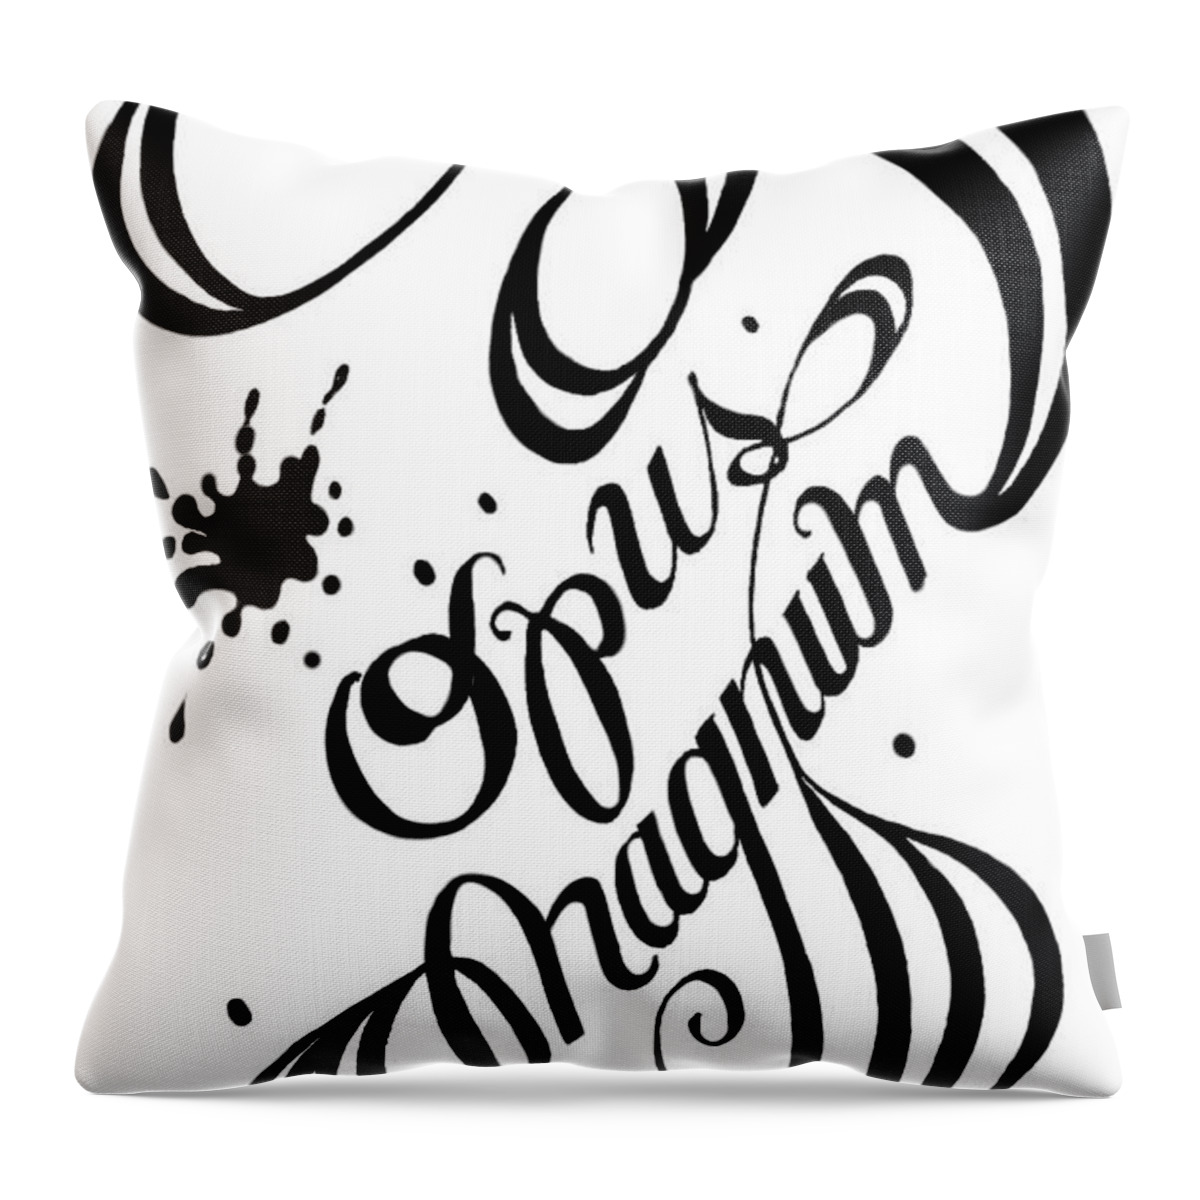 Opus Magnum Throw Pillow featuring the digital art Opus Magnum by Carol Jacobs